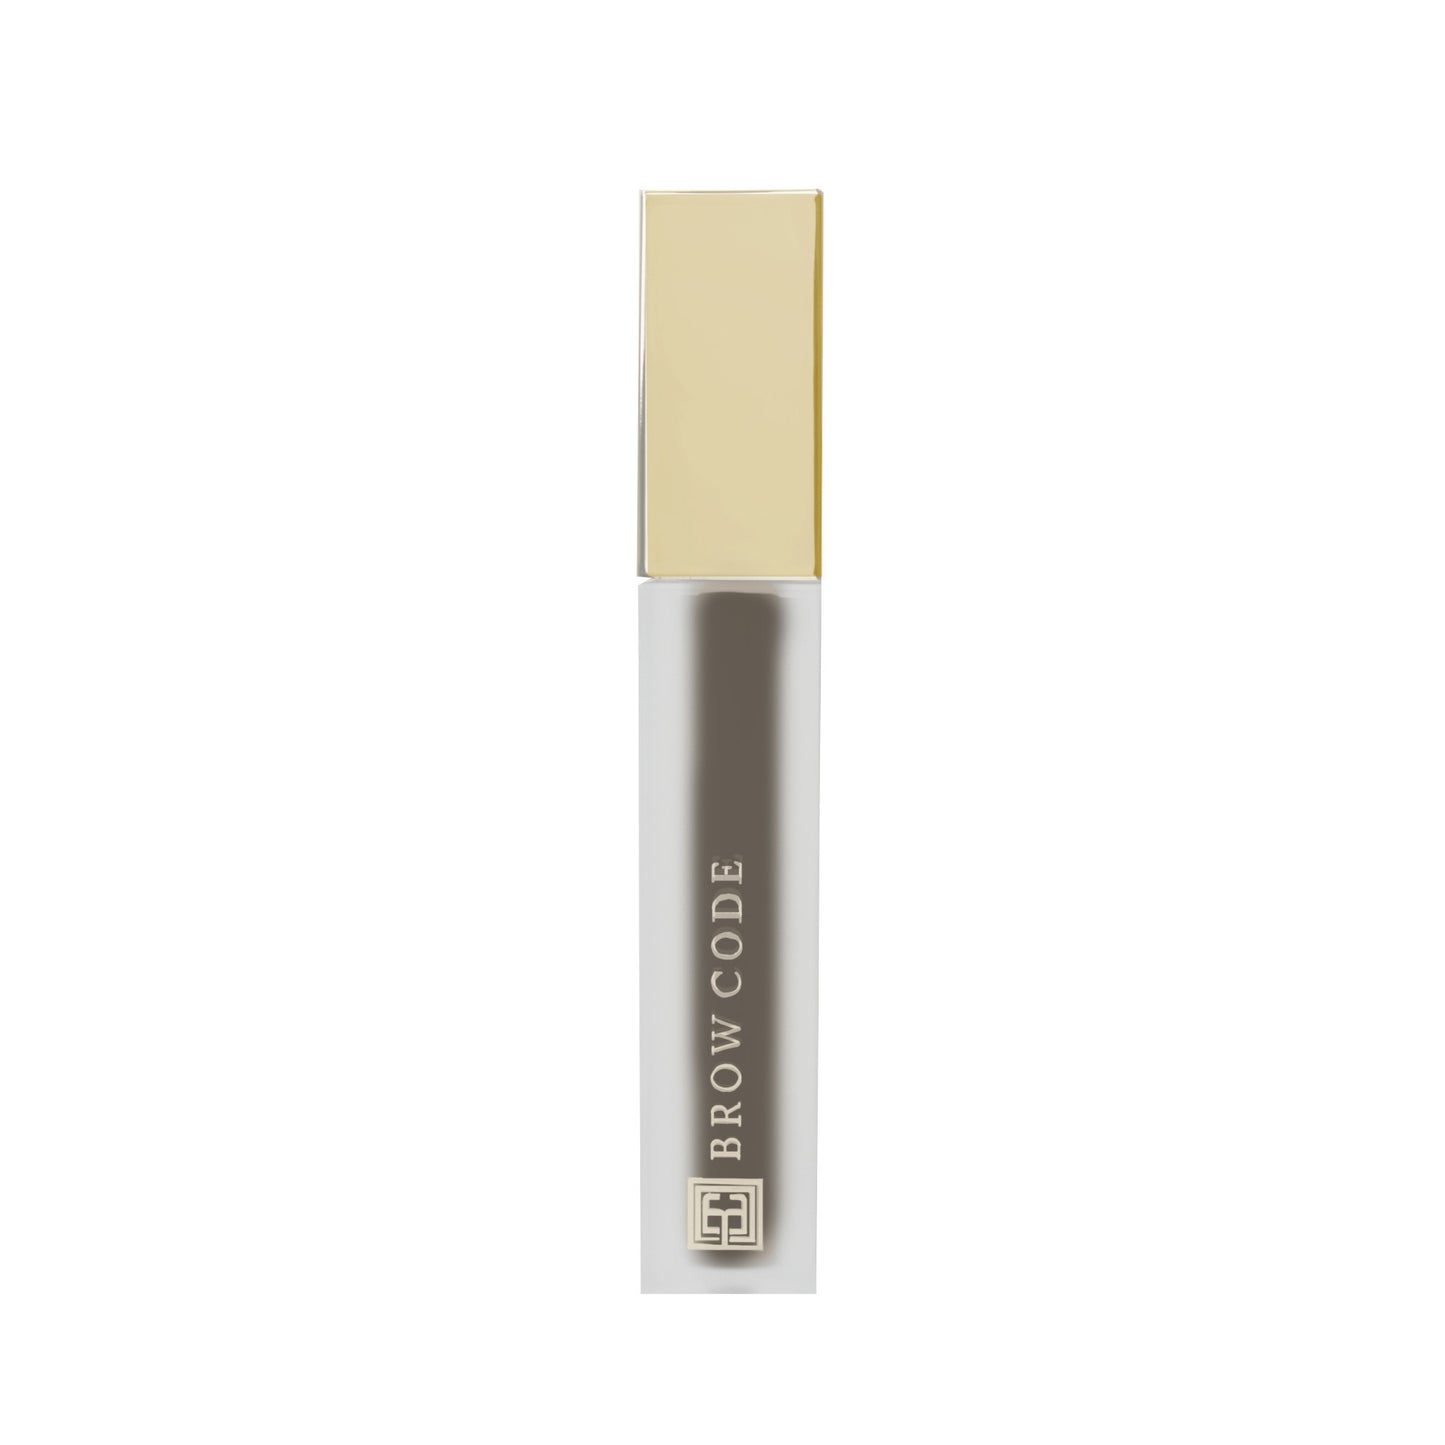 Tinted Multi-Peptide Brow Gel - Color-Chocolate - product against a white background